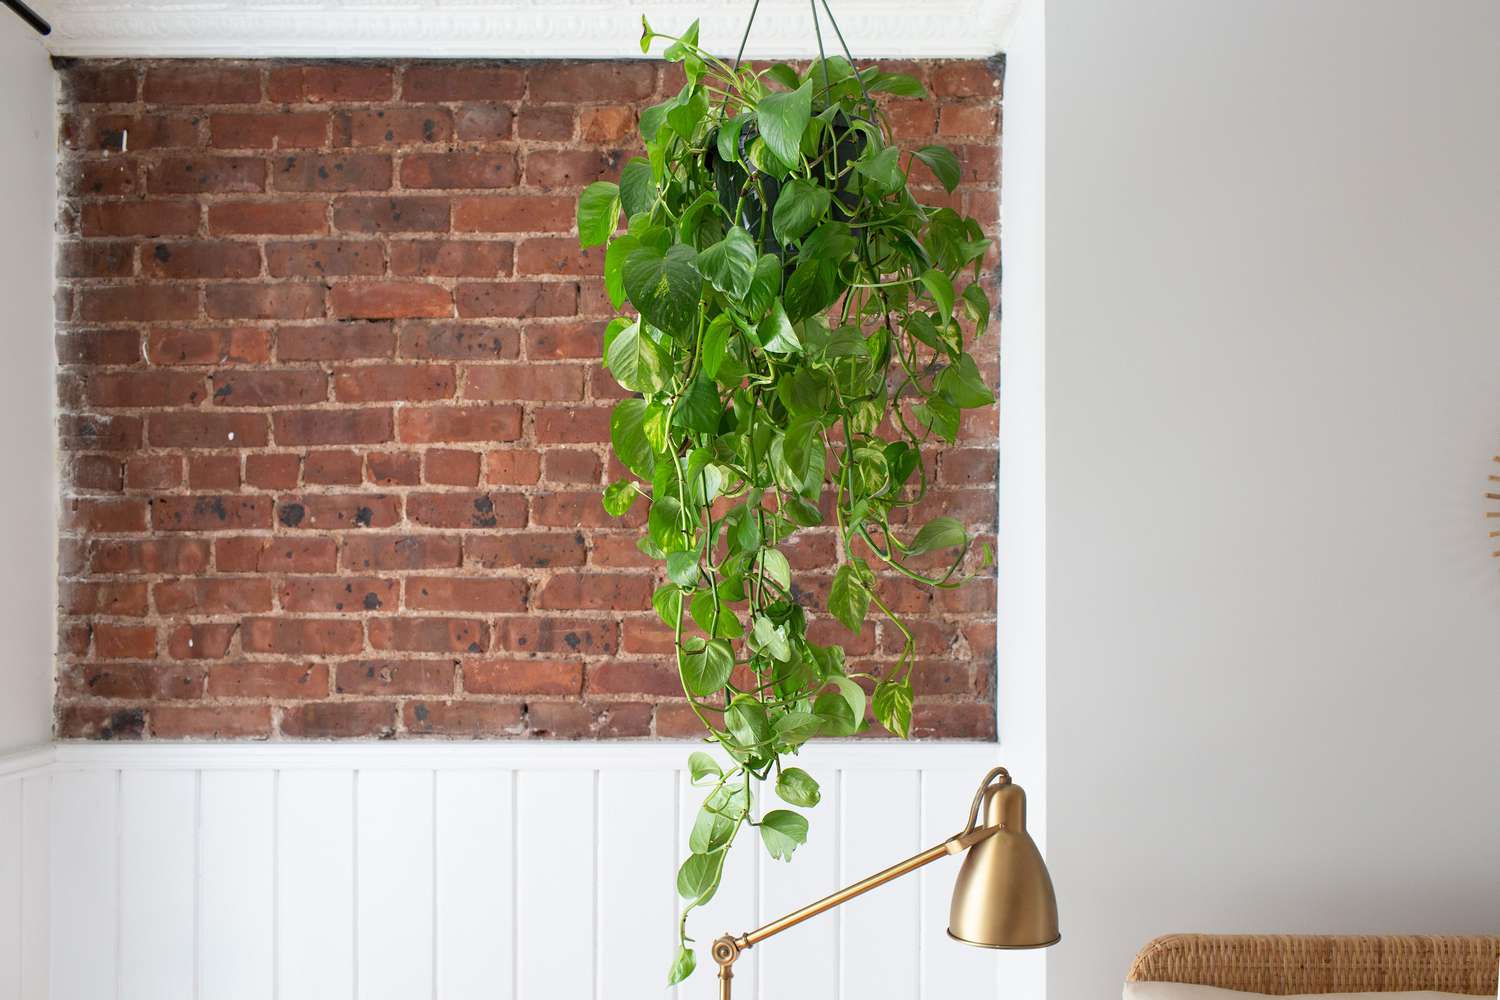 Golden pothos plant hanging from ceiling in from brick wall and above gold lamp